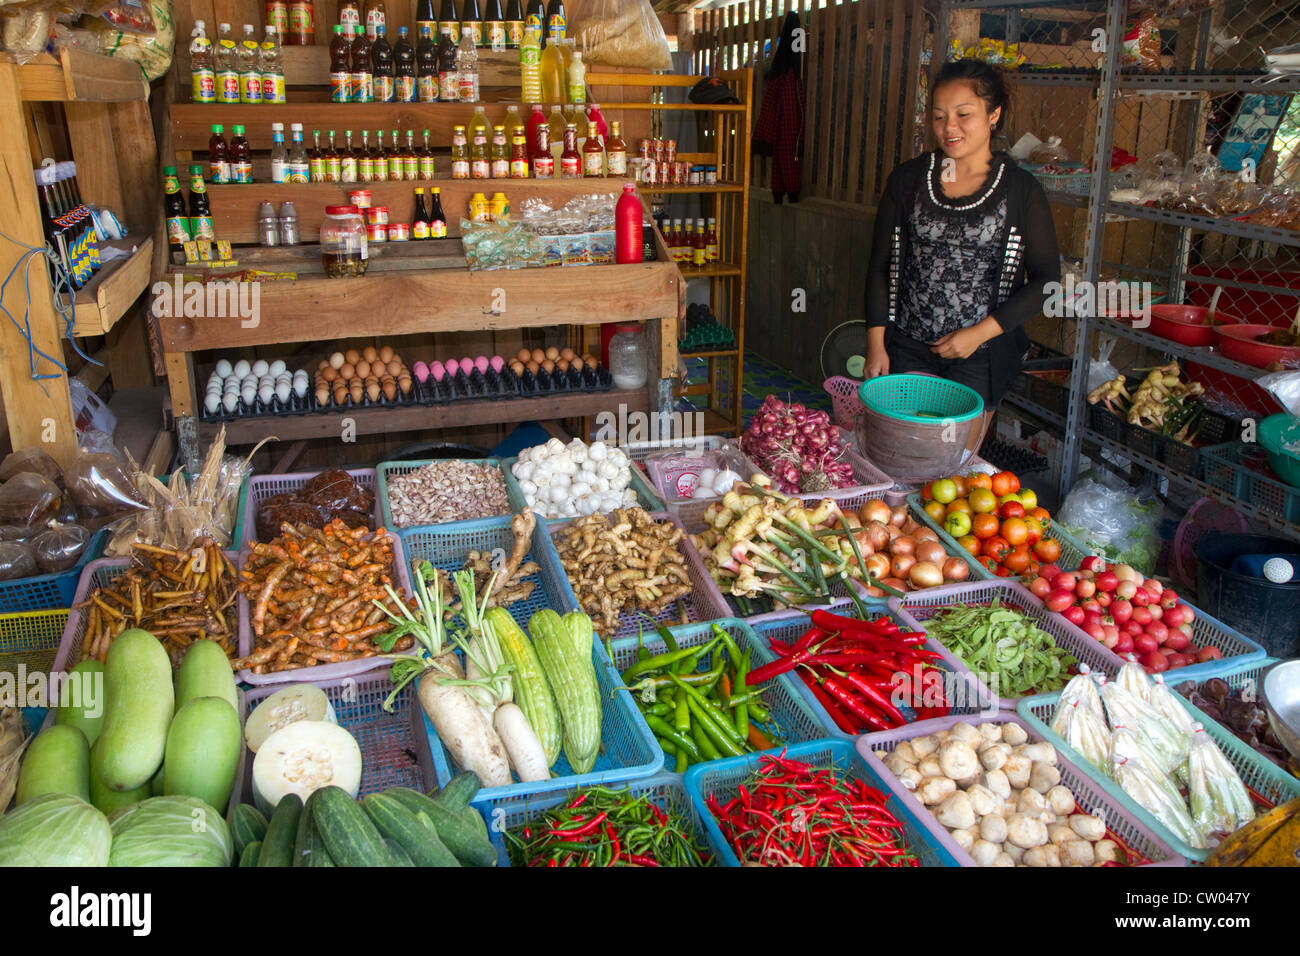 Woman selling fresh vegetables and eggs at an open air market on the island of Ko Samui, Thailand. Stock Photo